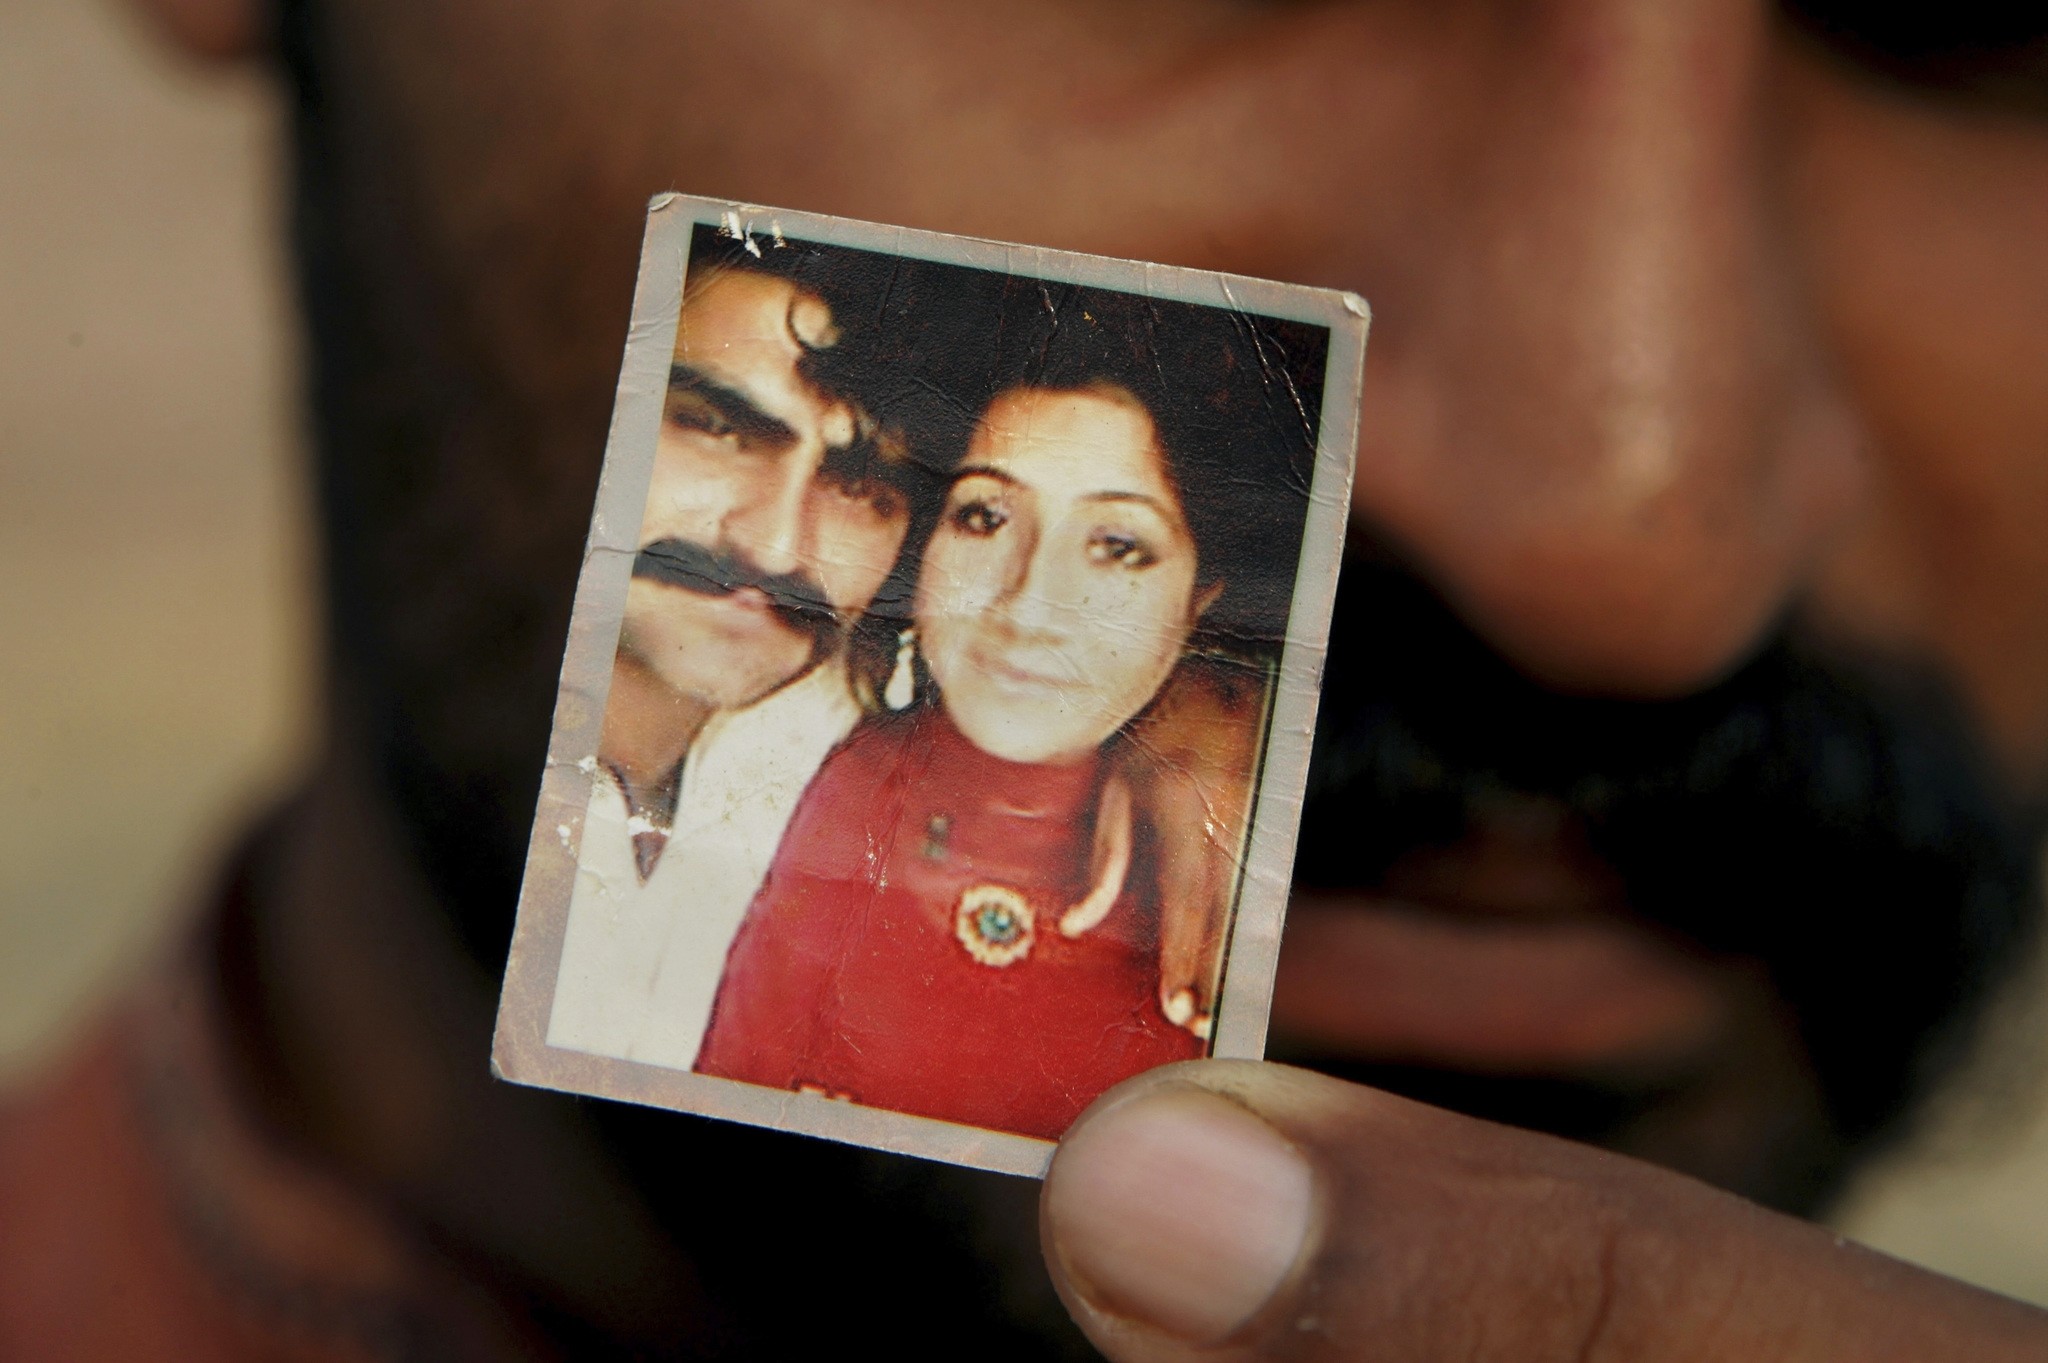 In this June 18, 2016 photo, Mohammed Tofeeq shows a picture with his wife Muqadas Tofeeq, who local police say was killed by her mother, in Butrawala village on the outskirts of Gujranwala, Pakistan. (AP Photo)